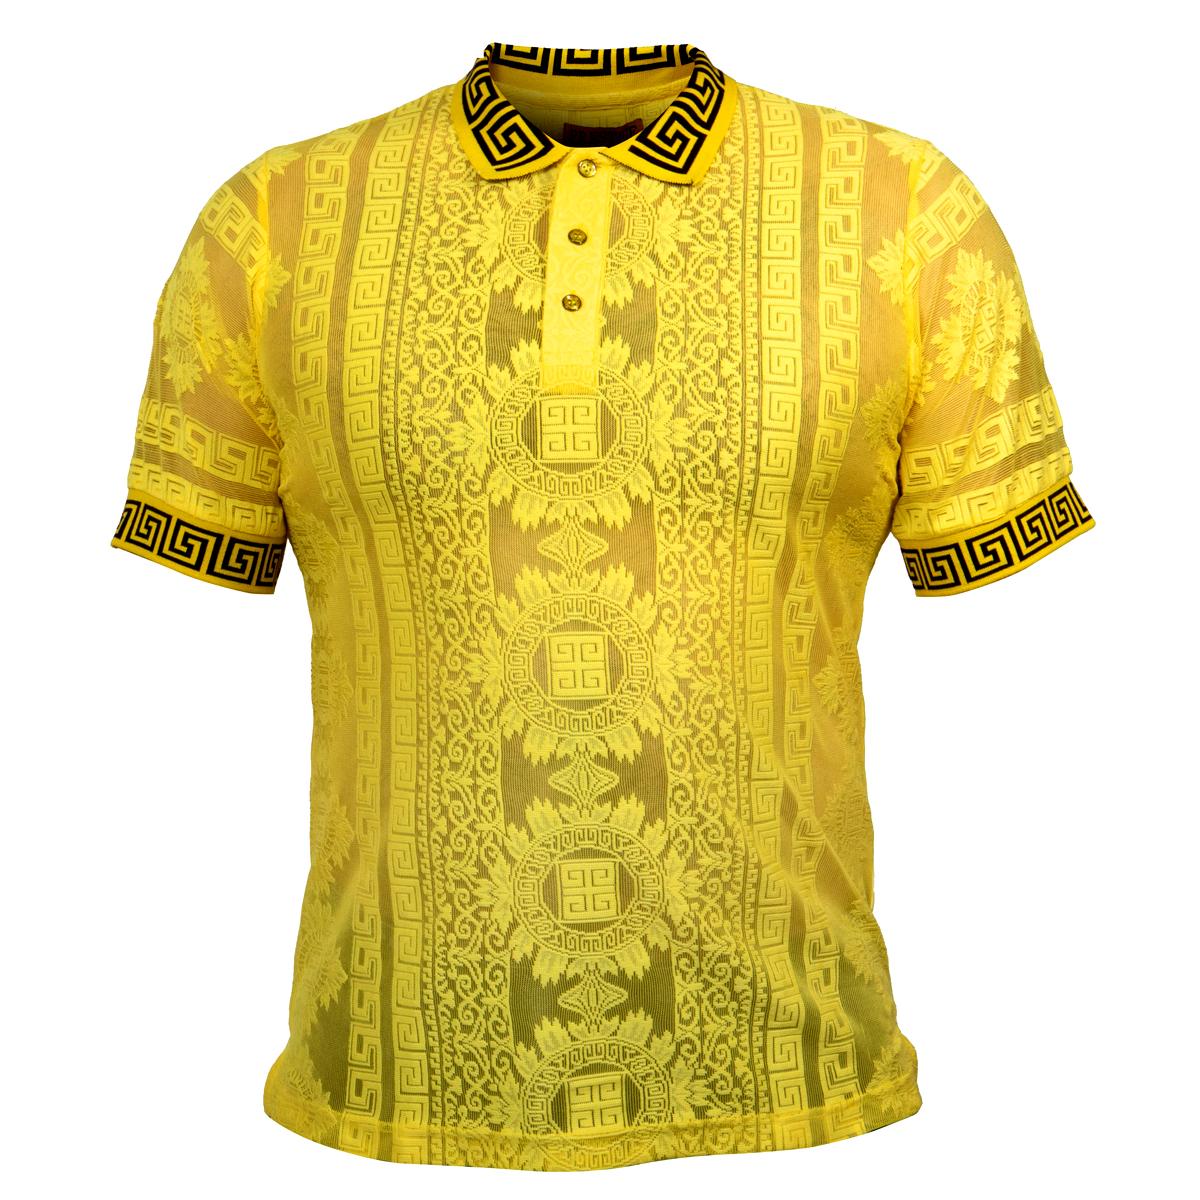 Prestige Yellow / Black Greek Embroidered / Laced Short Sleeve Shirt ...